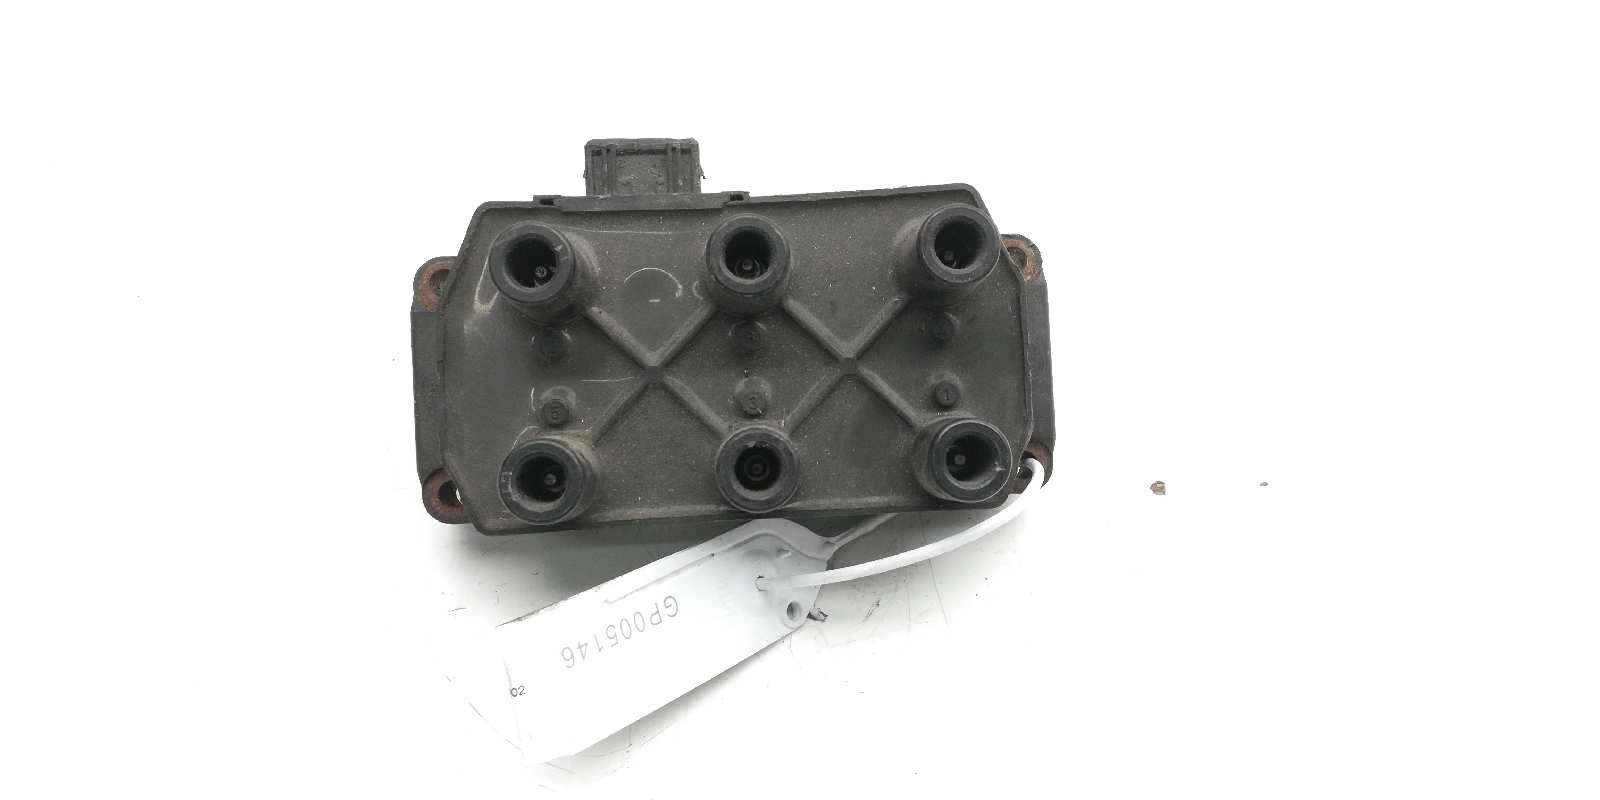 OPEL Omega B (1994-2003) High Voltage Ignition Coil 0221503002 18496151